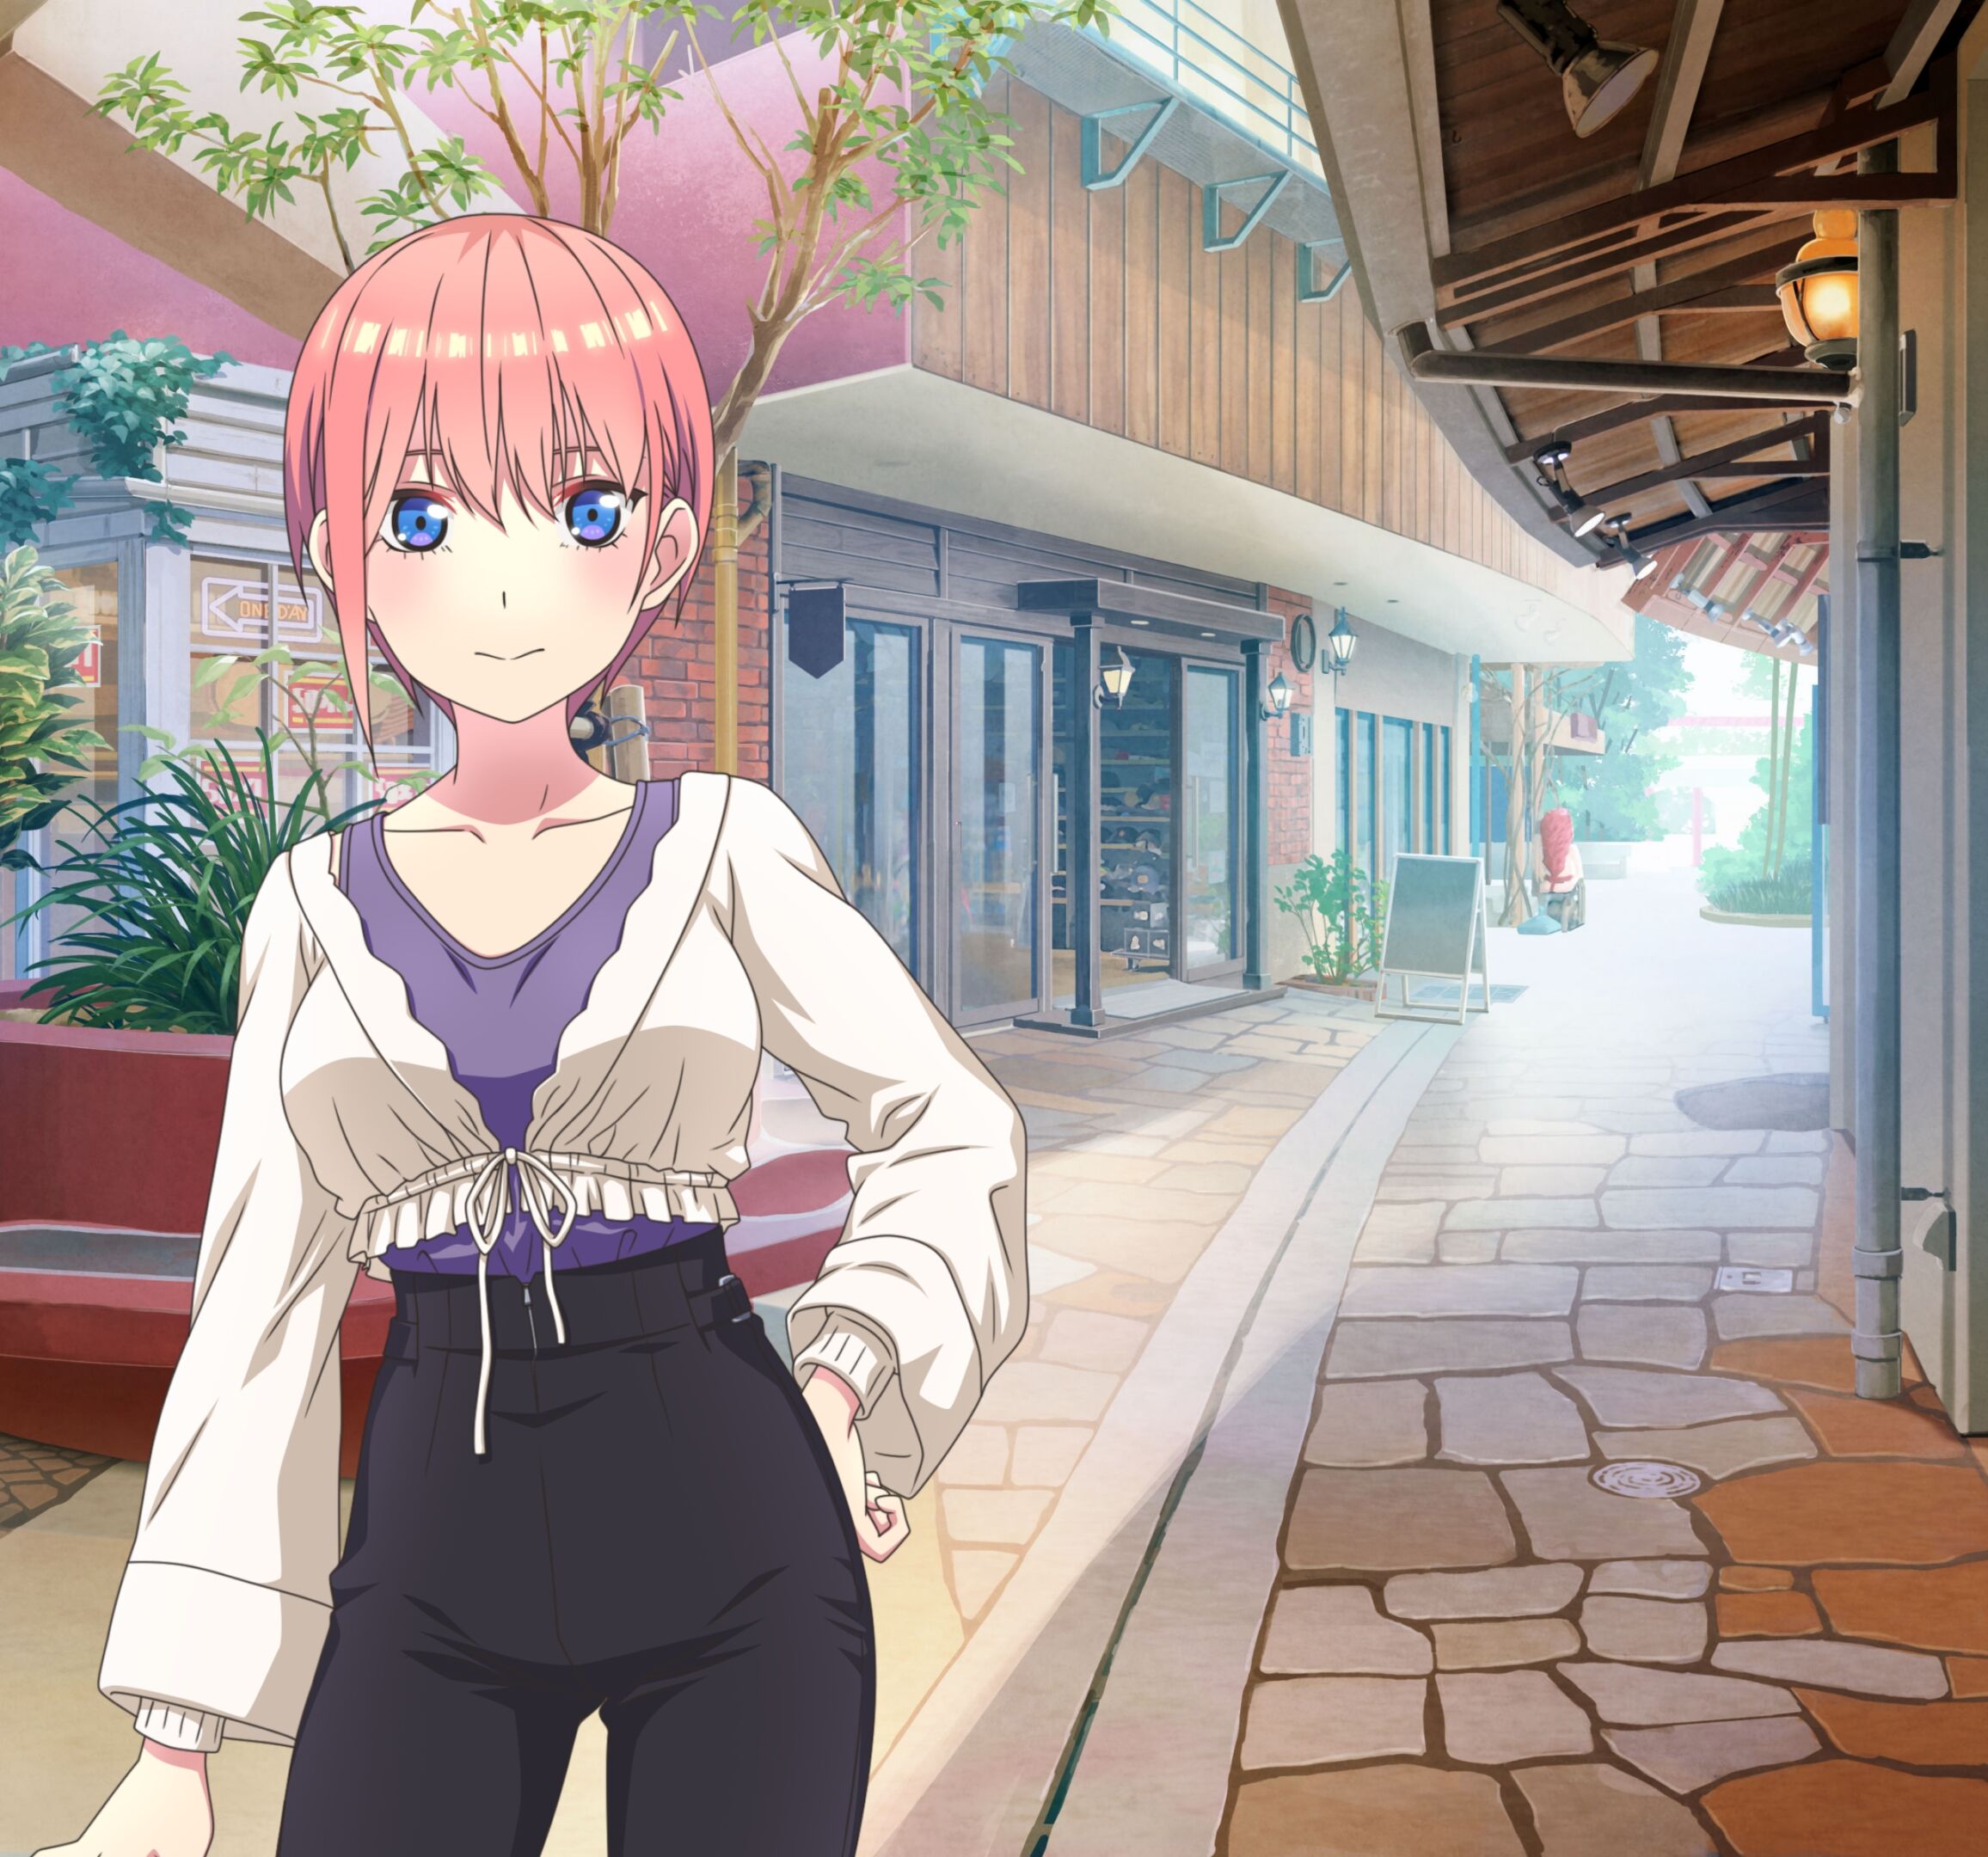 The Quintessential Quintuplets the Movie: Five Memories of My Time with You  announced for PS4, Switch - Gematsu